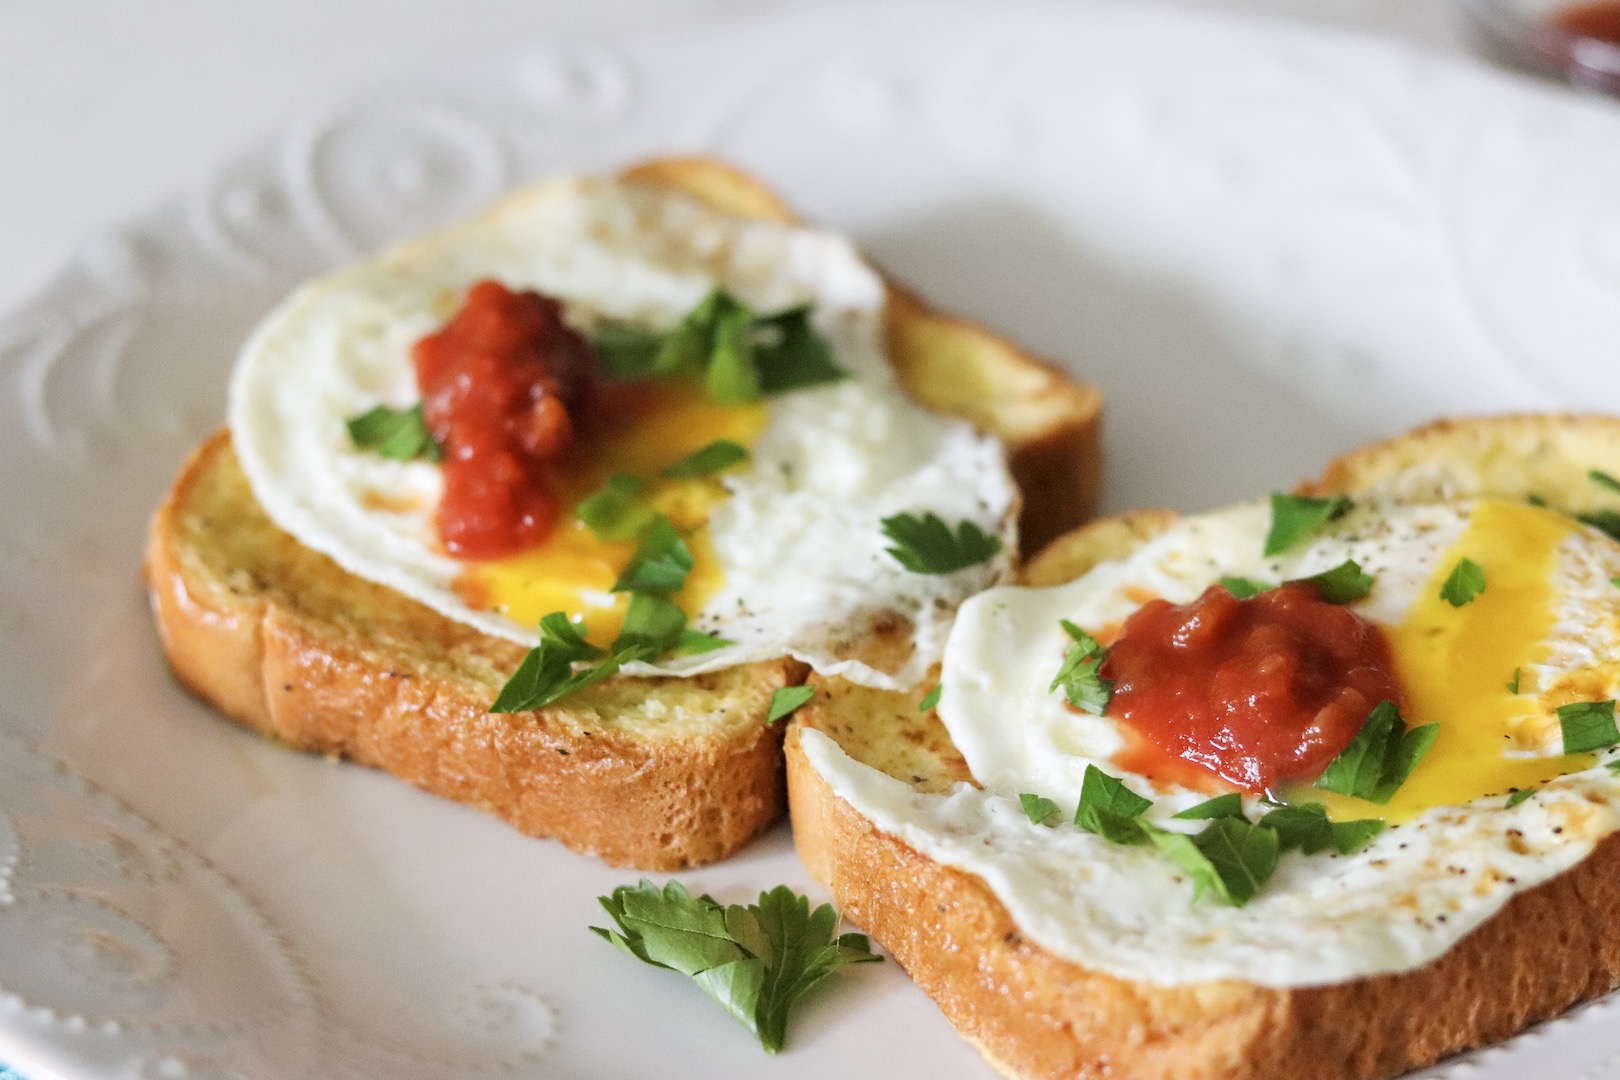 Savory French Toast topped with a fried egg, salsa, and chopped fresh parsley